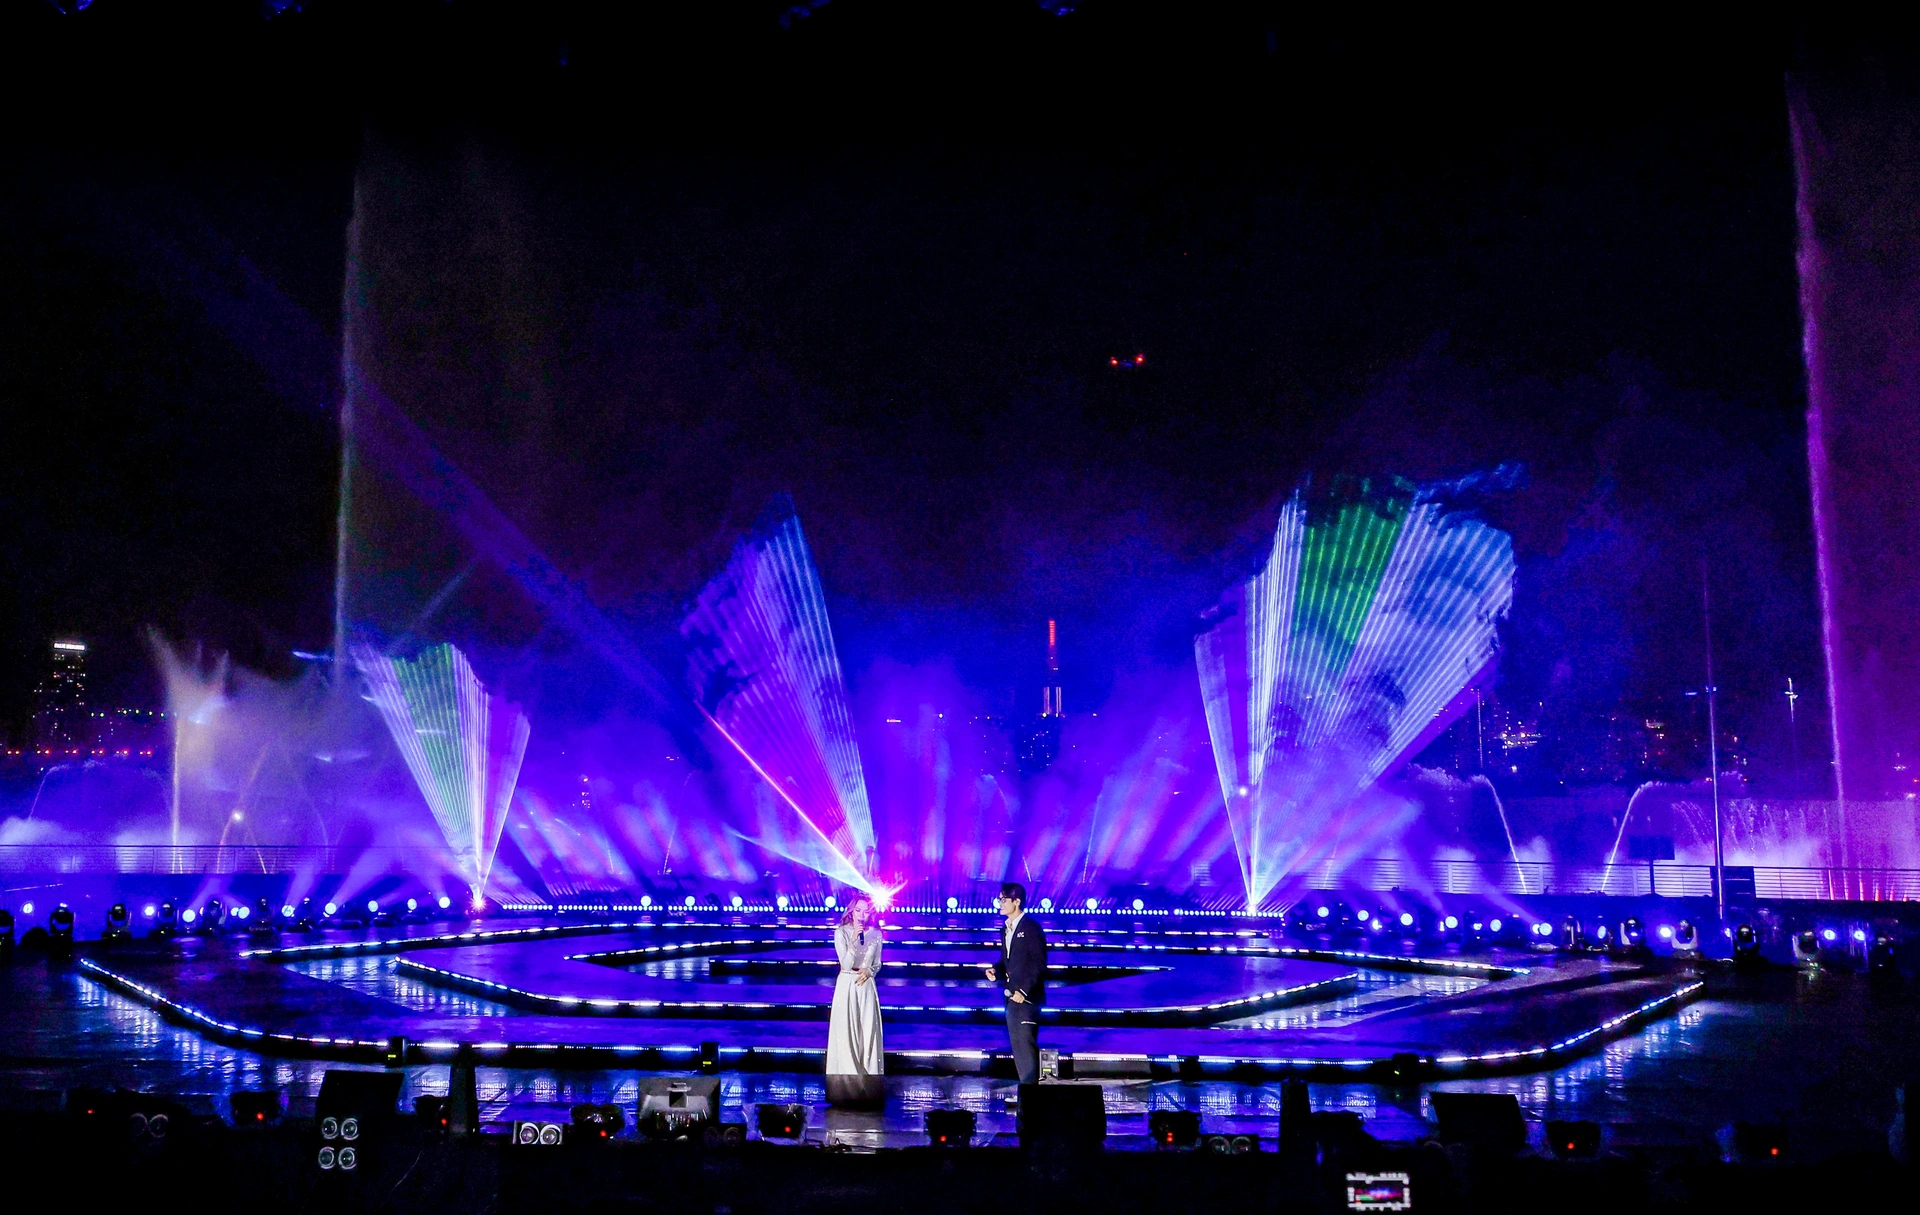 At The Global City - Masterise Homes opened the largest water music zone in Southeast Asia